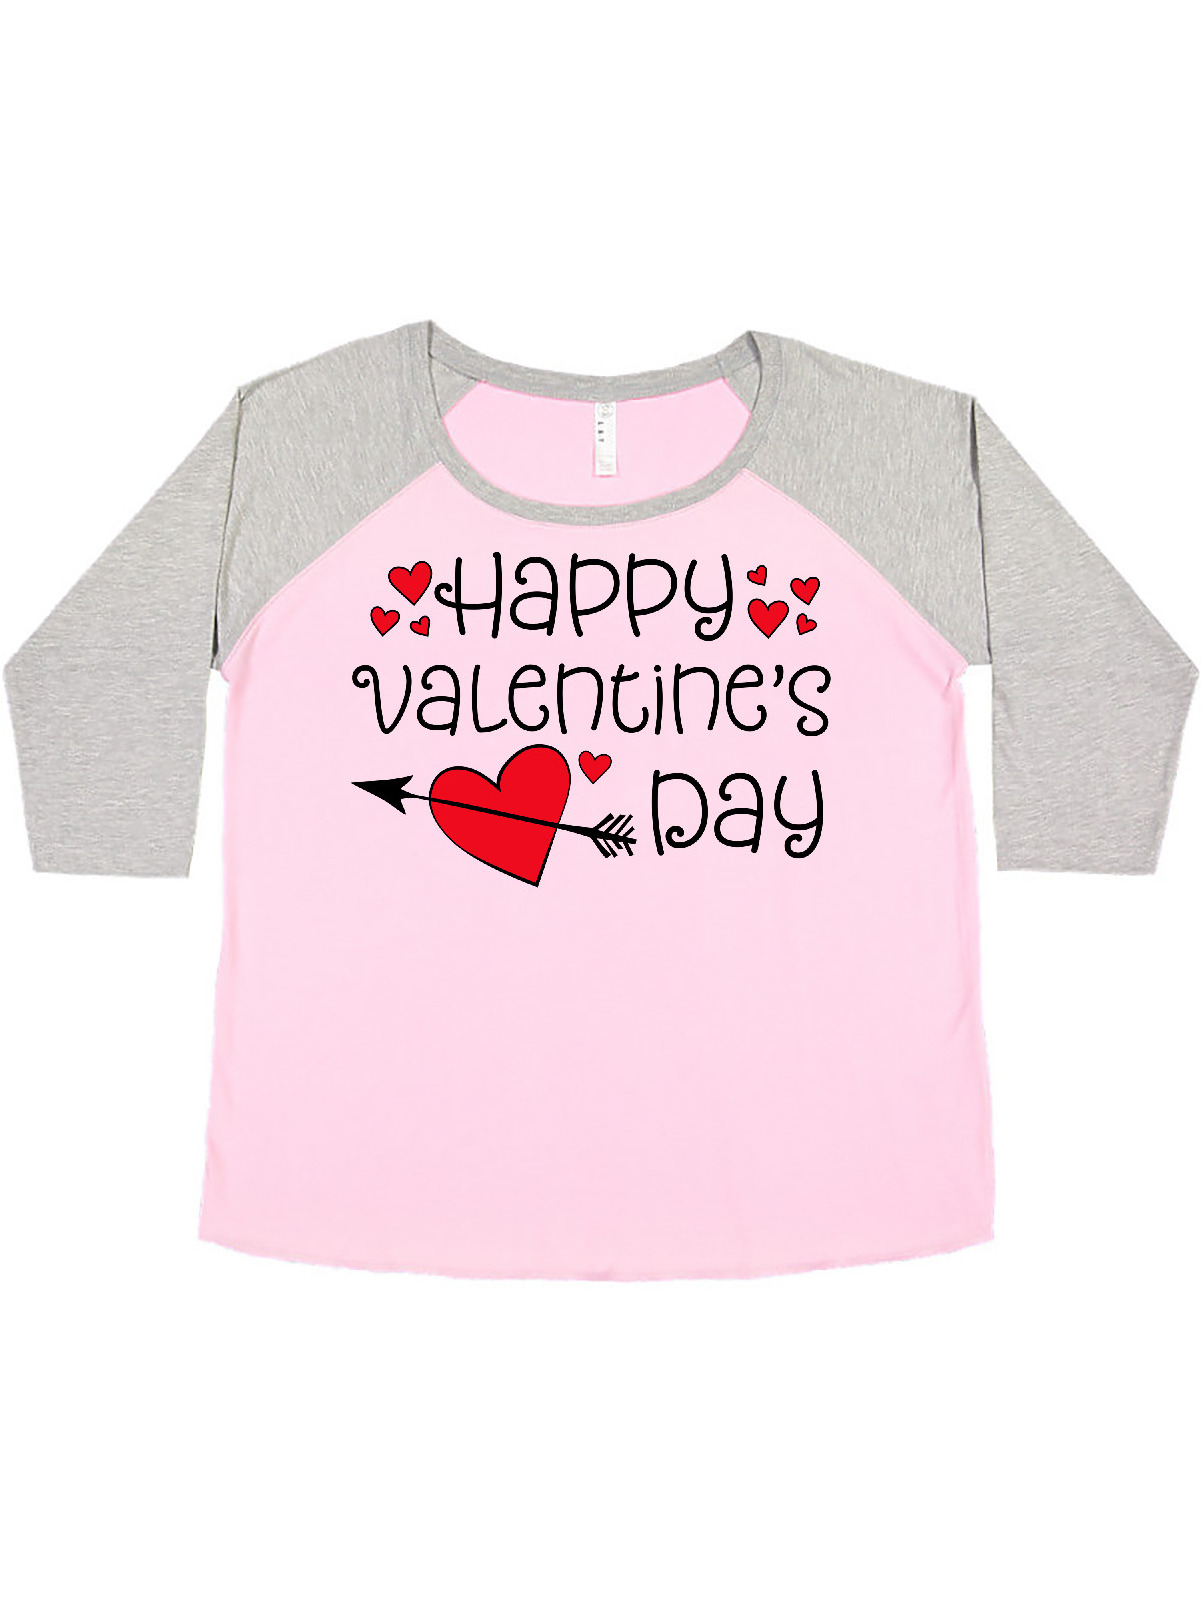 Happy Valentines Day red hearts and arrow Women's Plus Size T-Shirt ...